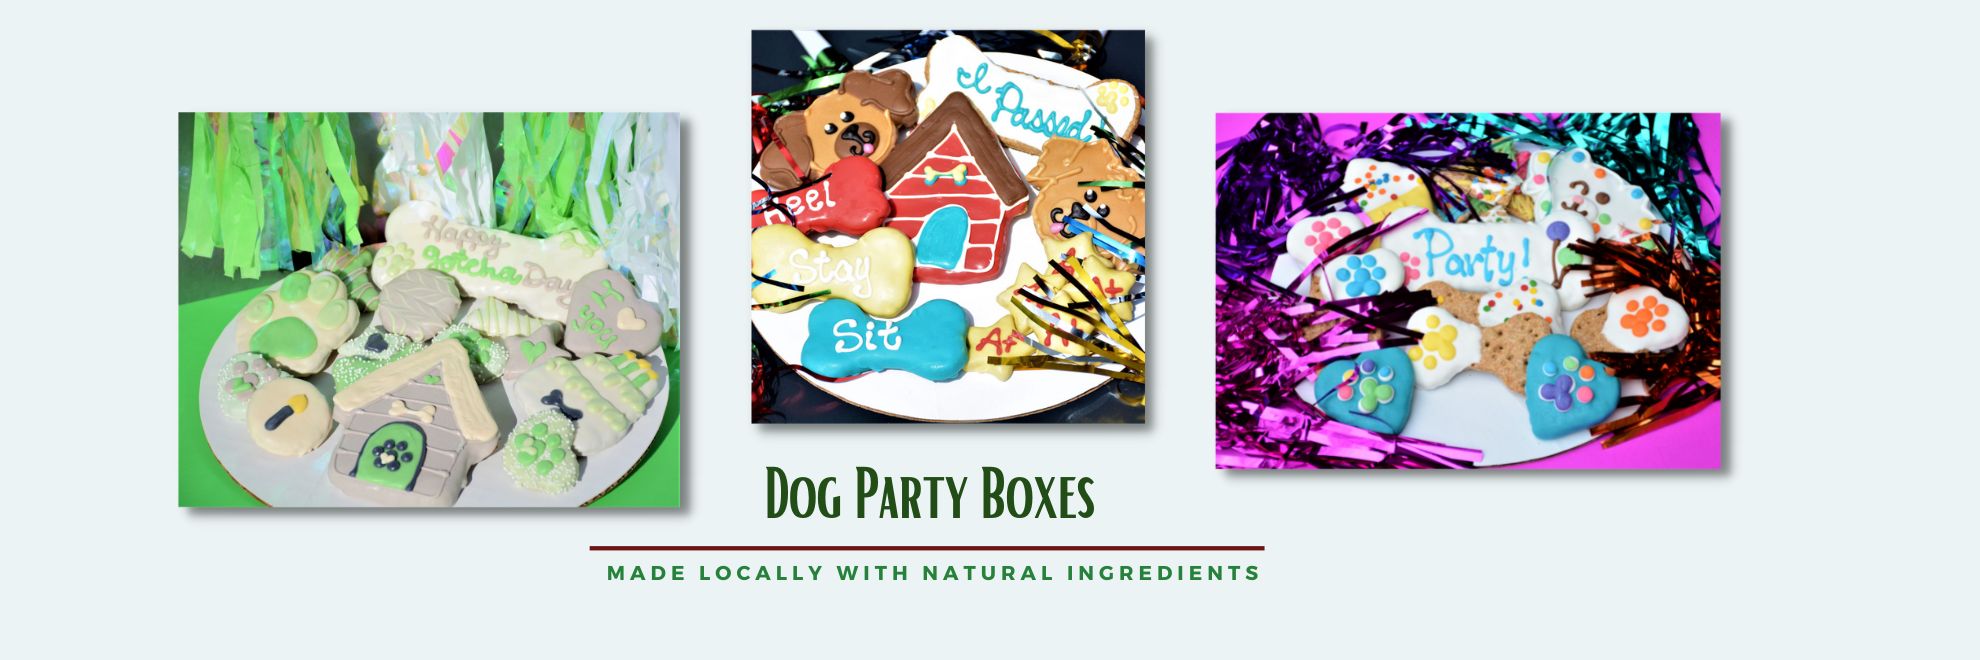 Dog Party Boxes